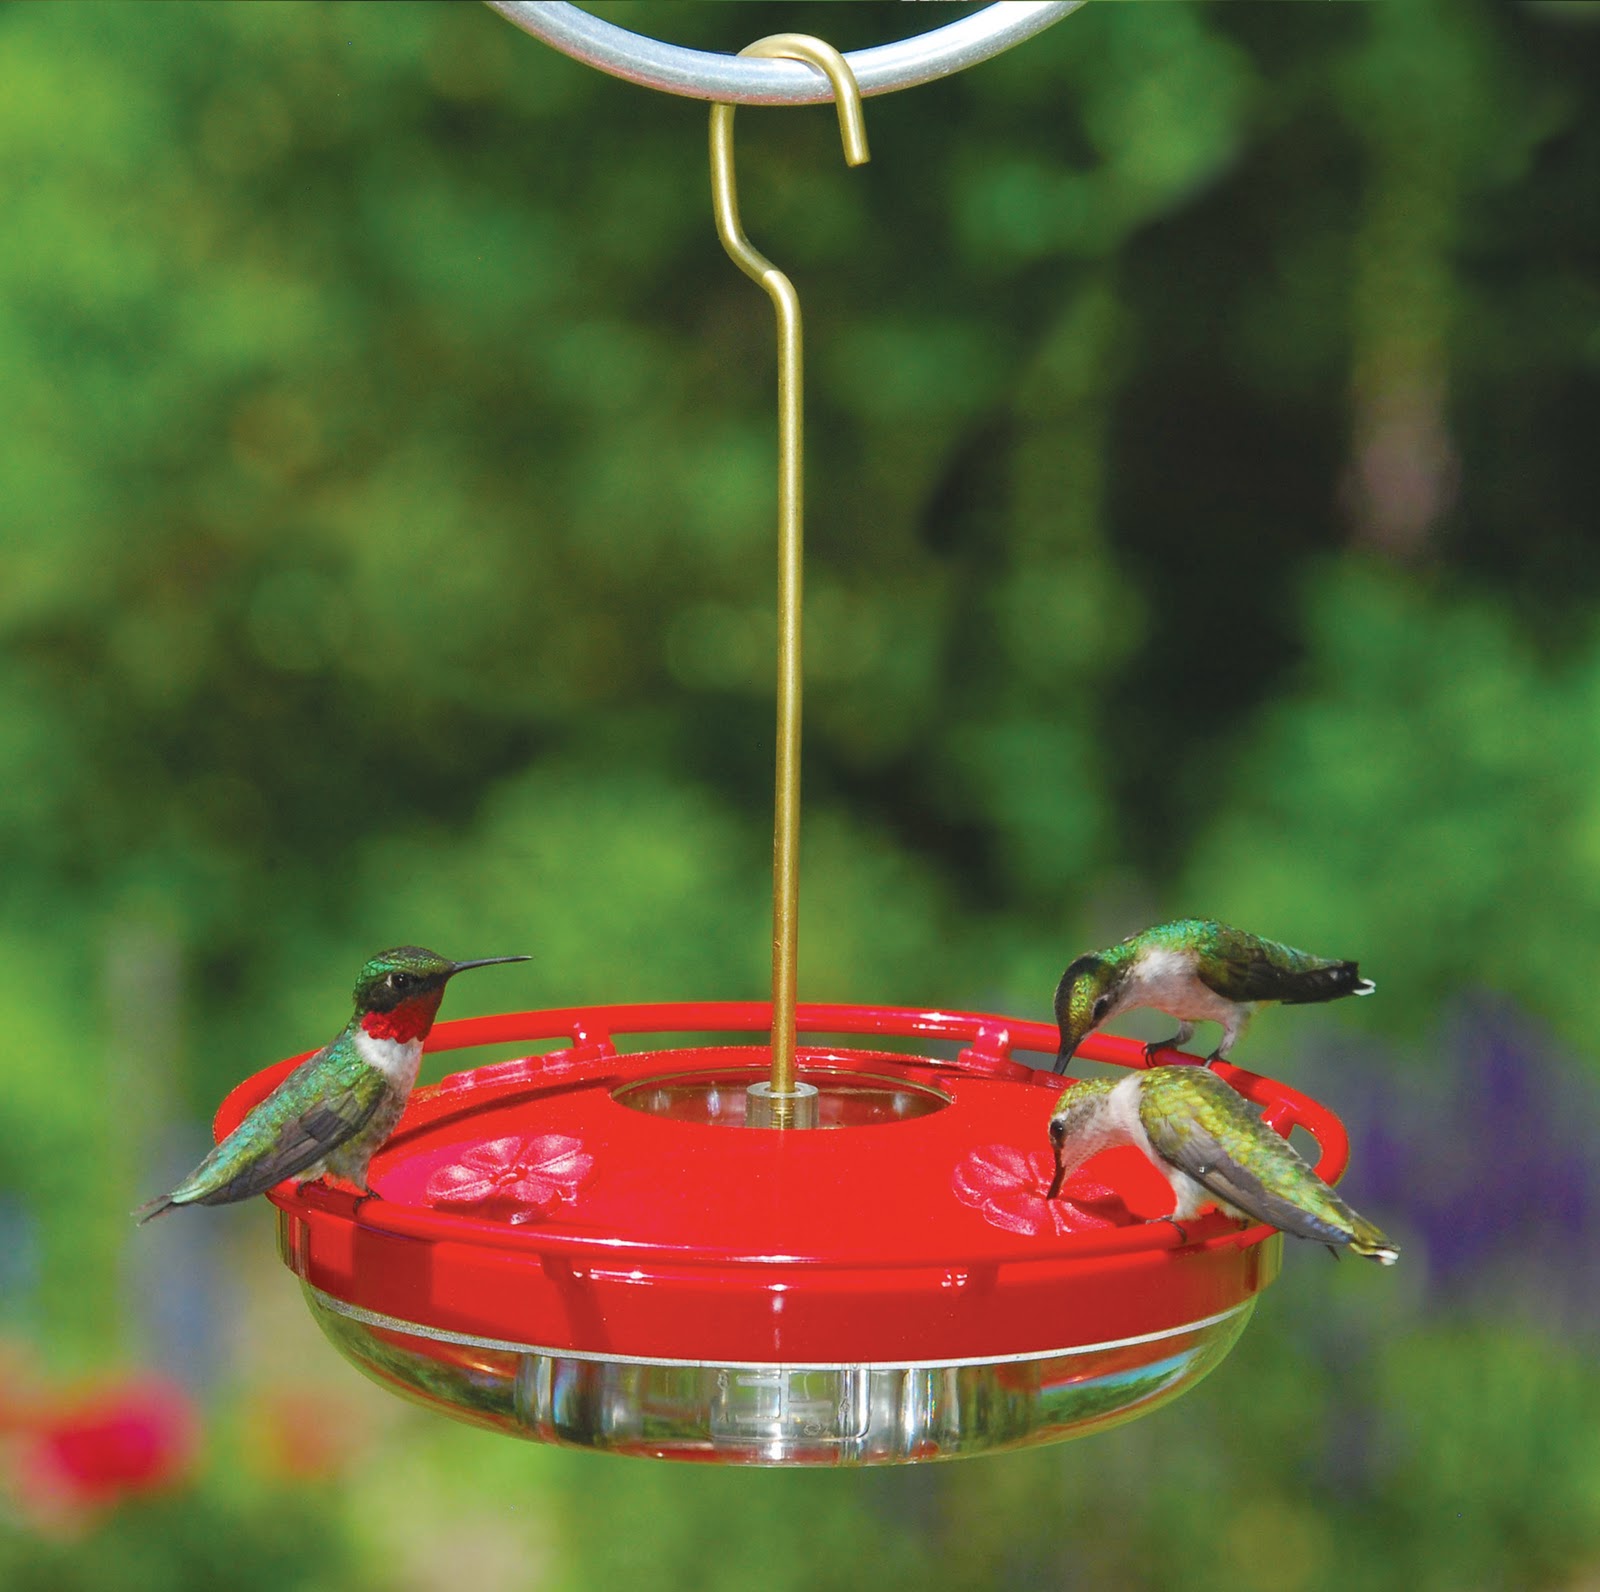 FeedtheBirds 1 Fun Facts about Rubythroated Hummingbirds